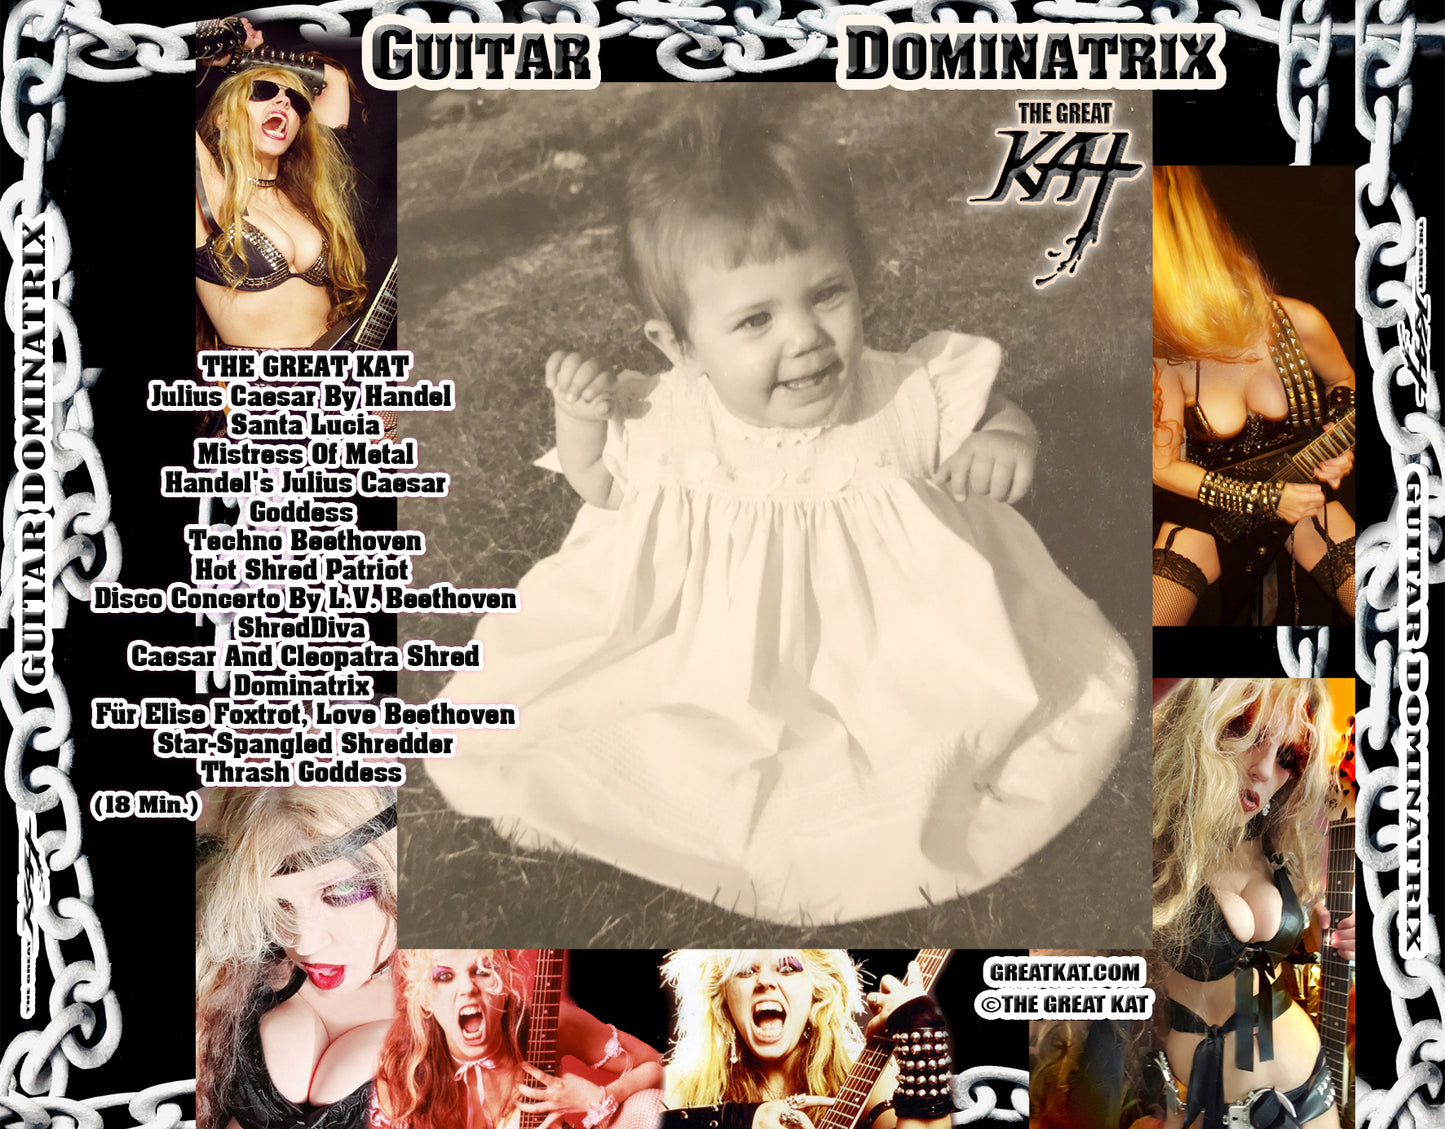 THROWBACK KATHY! "GUITAR DOMINATRIX" New Blistering 14-Song Album by The Great Kat Guitar Dominatrix featuring the Ultimate "Throwback Kathy" Album Front & Back Covers!